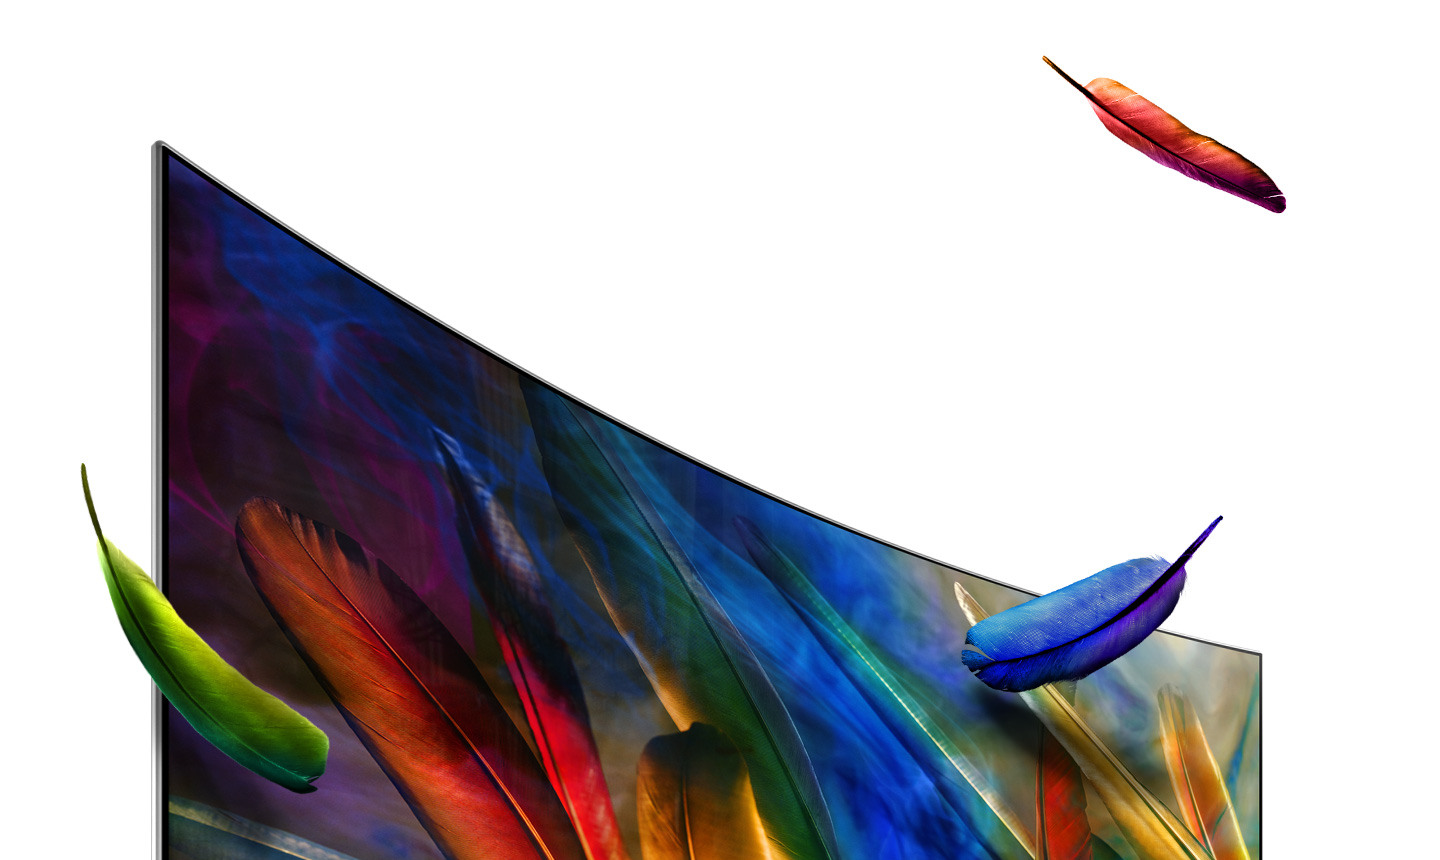 Curved QLED TV has been placed obliquely in the left, and feathers of various colors are falling from top to bottom on the right. On the screen, a various colored feathers are shown.